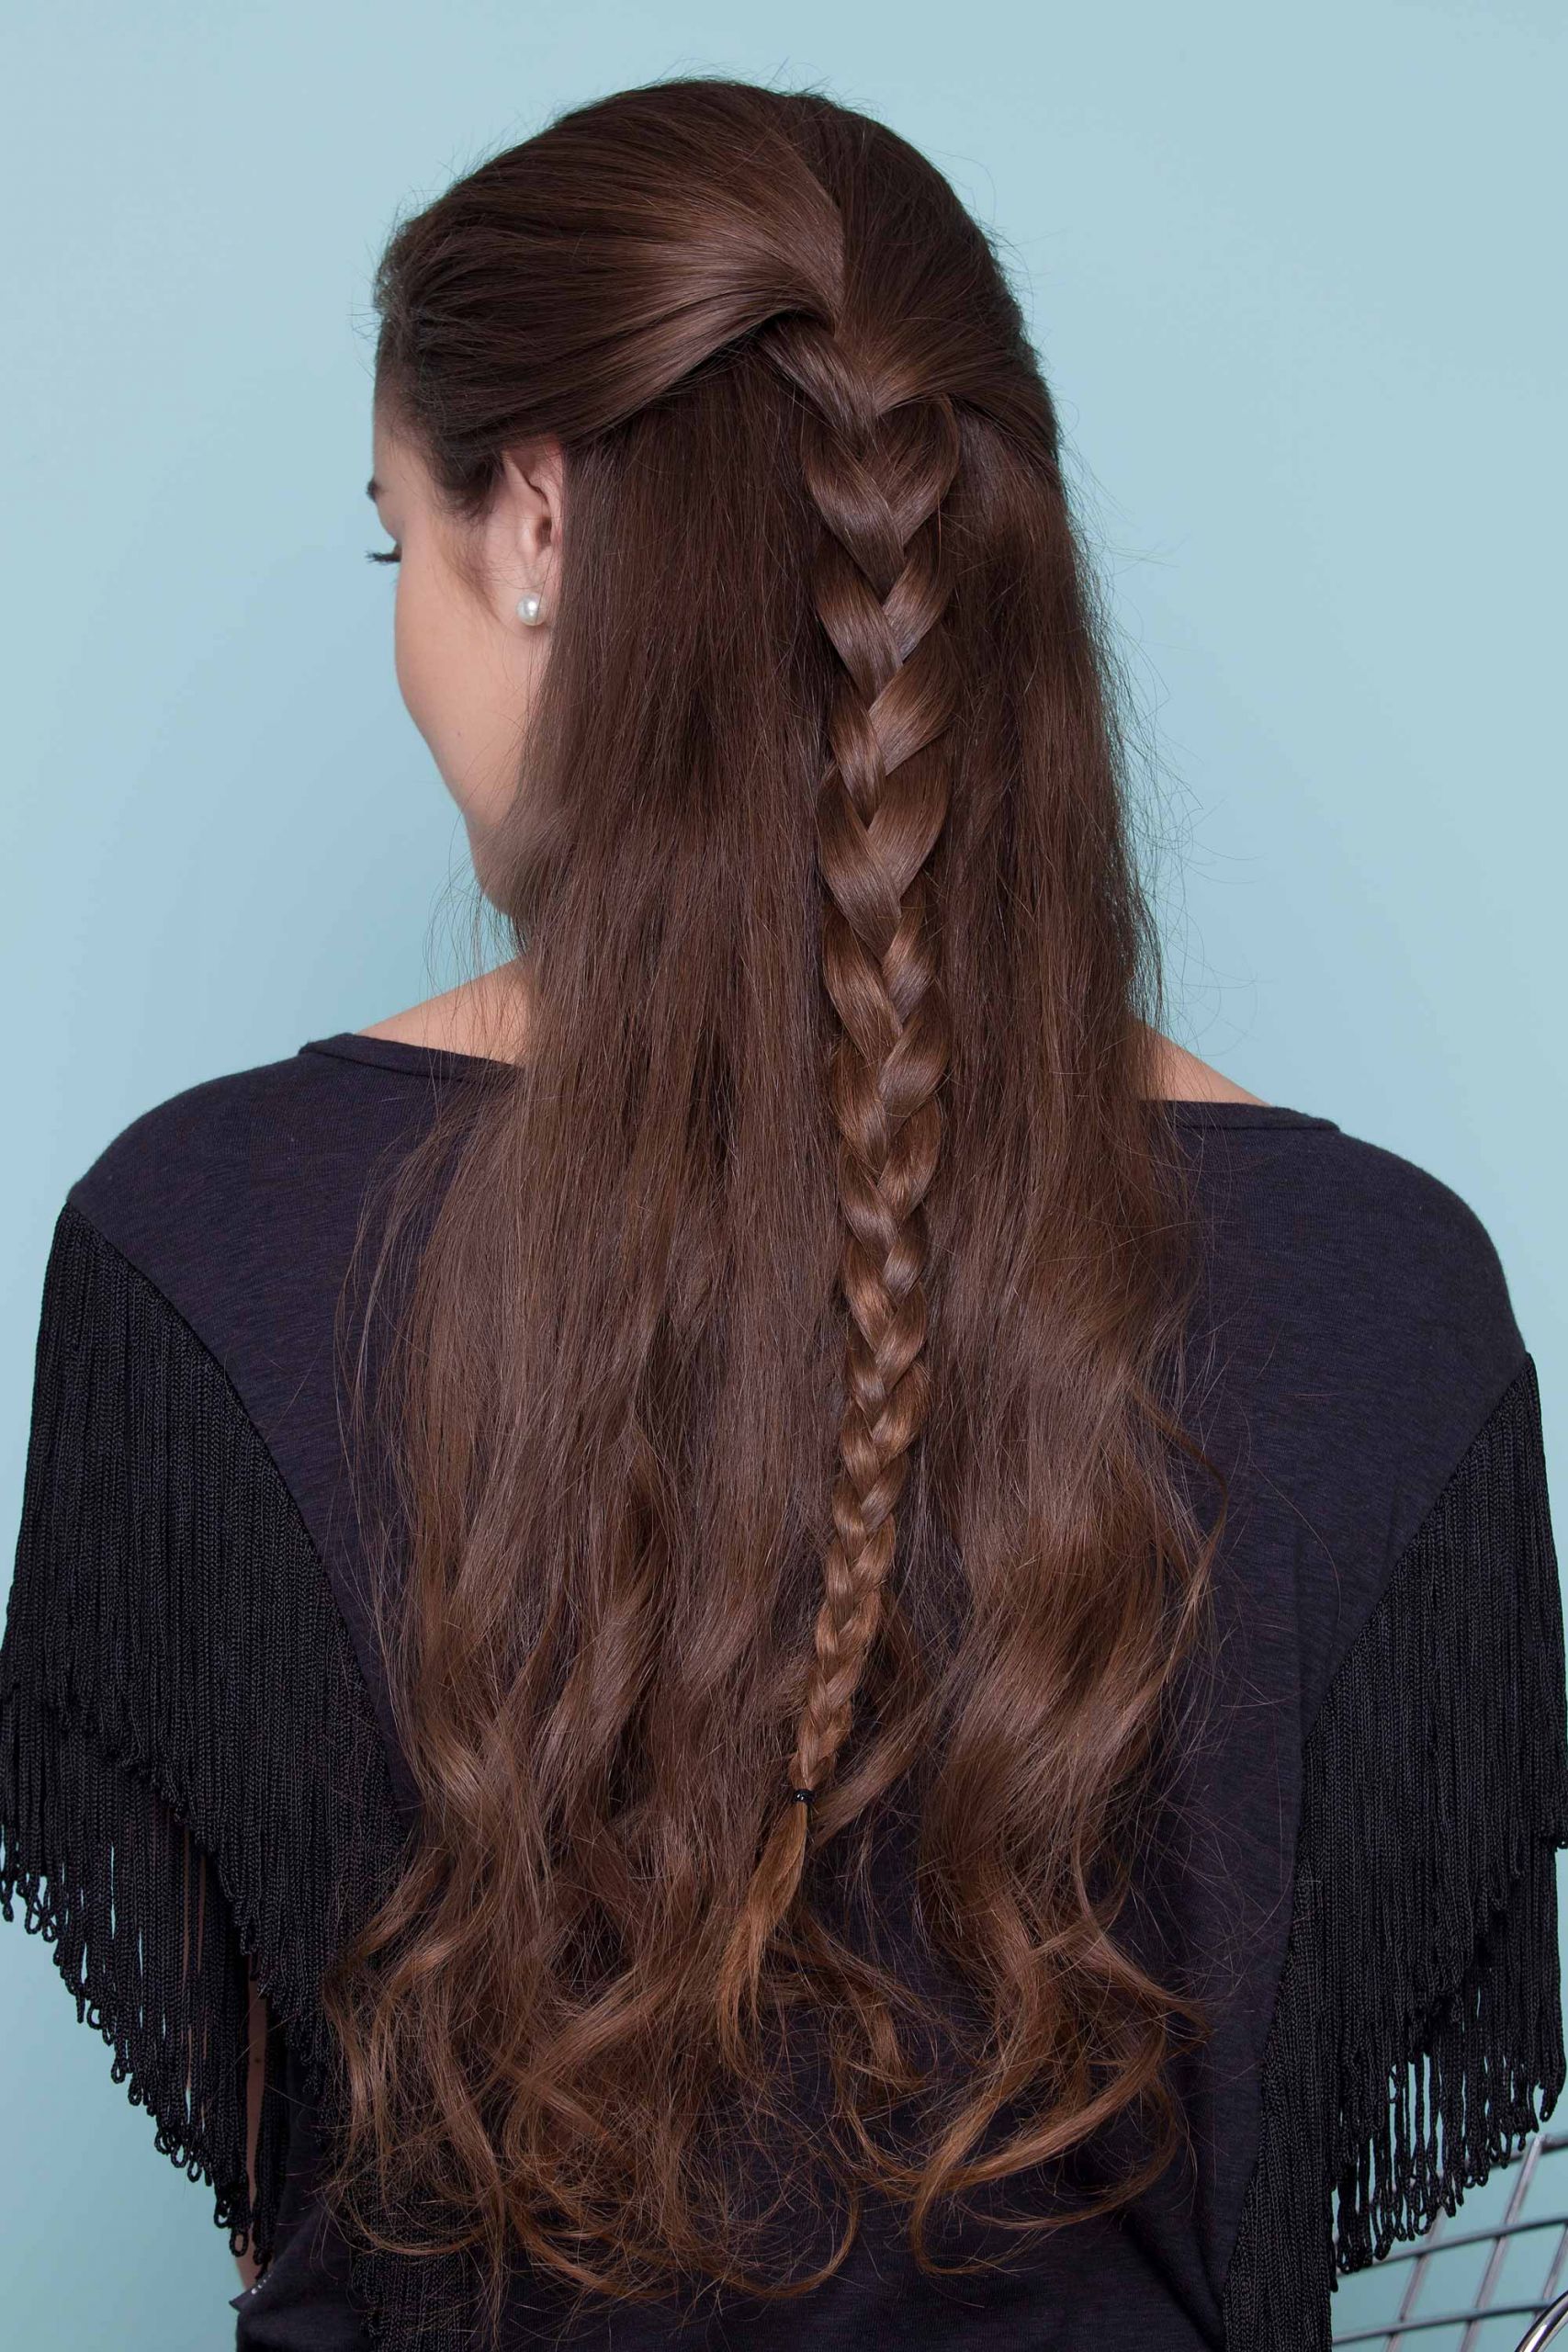 Half Braided Hairstyles
 40 Half Braided Hairstyles You Can Master In Minutes